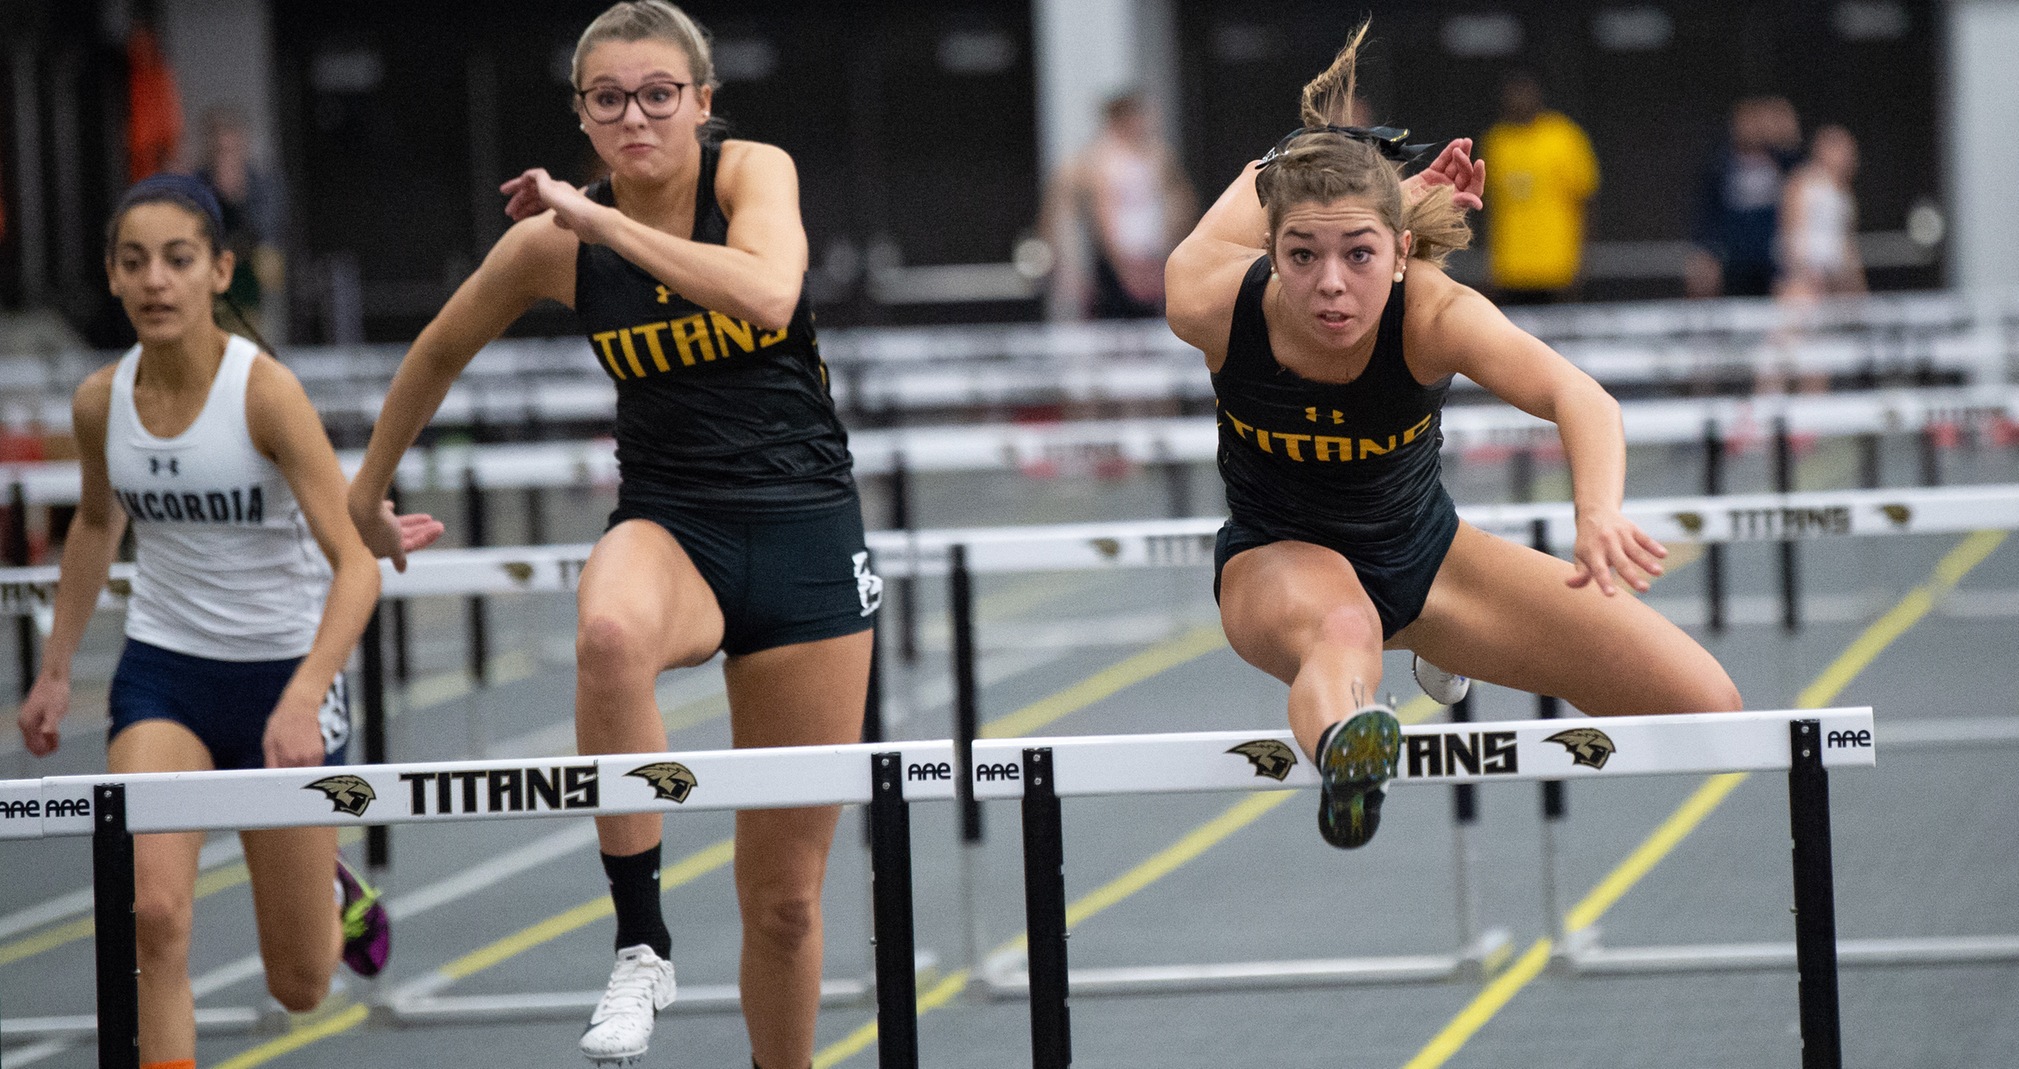 Cara Volz (right) finished second and Grace Tempesta fourth in the 60-meter hurdles at UW-Oshkosh Early Bird Invitational.